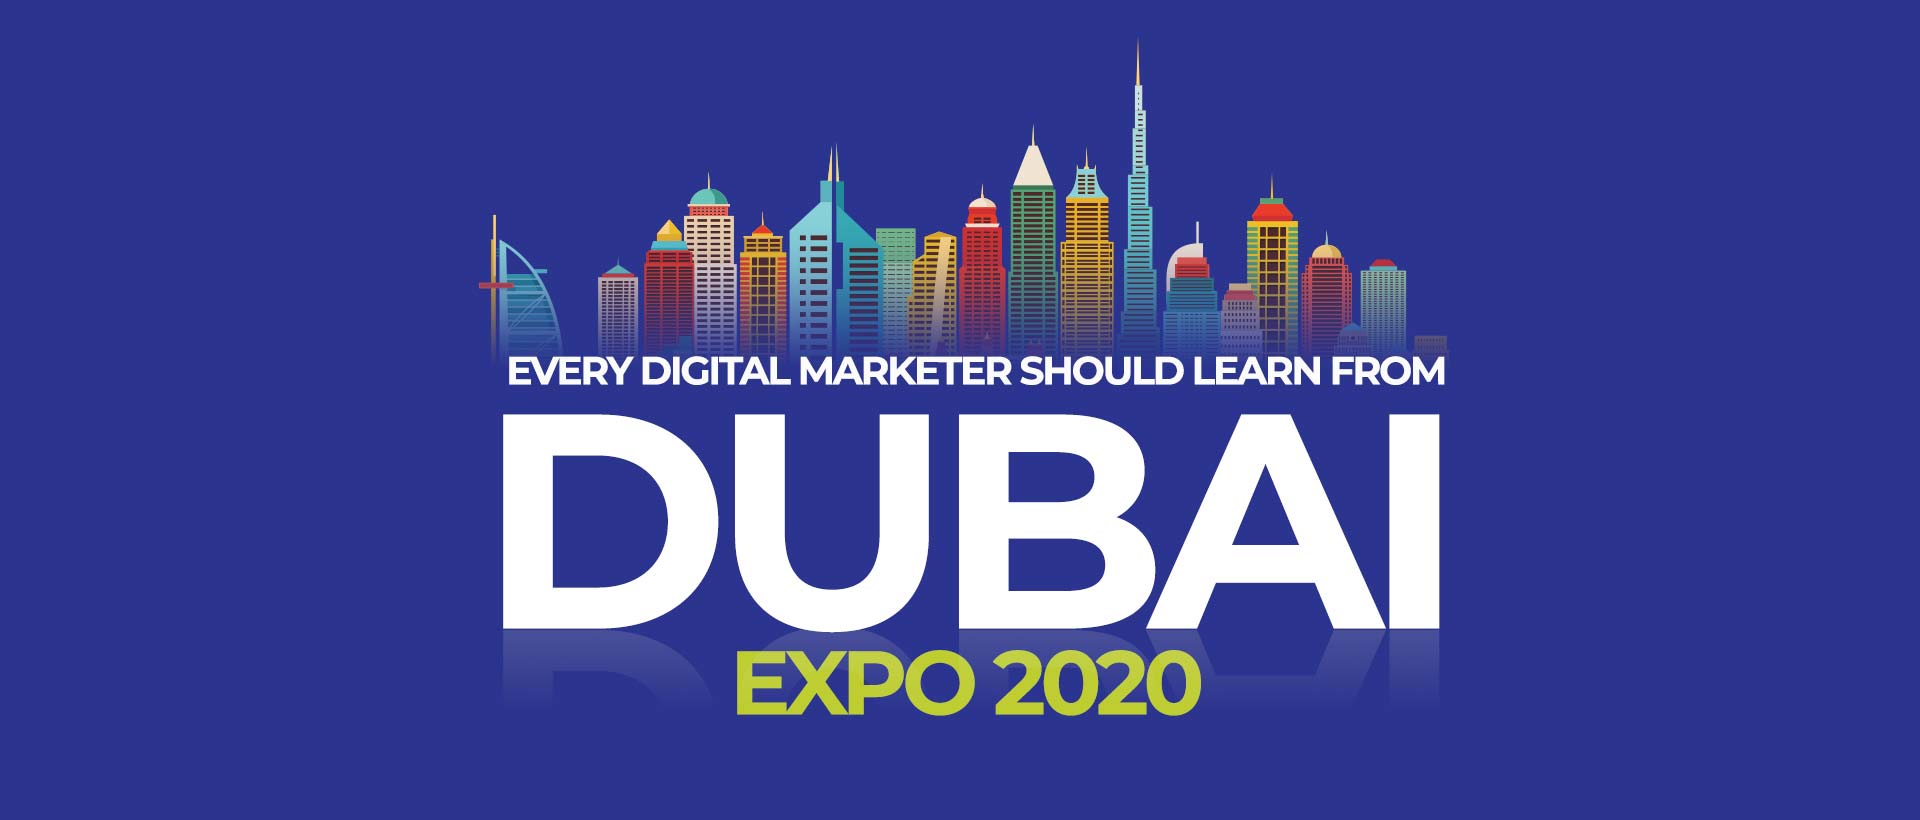 What  Every Digital Marketer Should Learn From Dubai Expo 2020